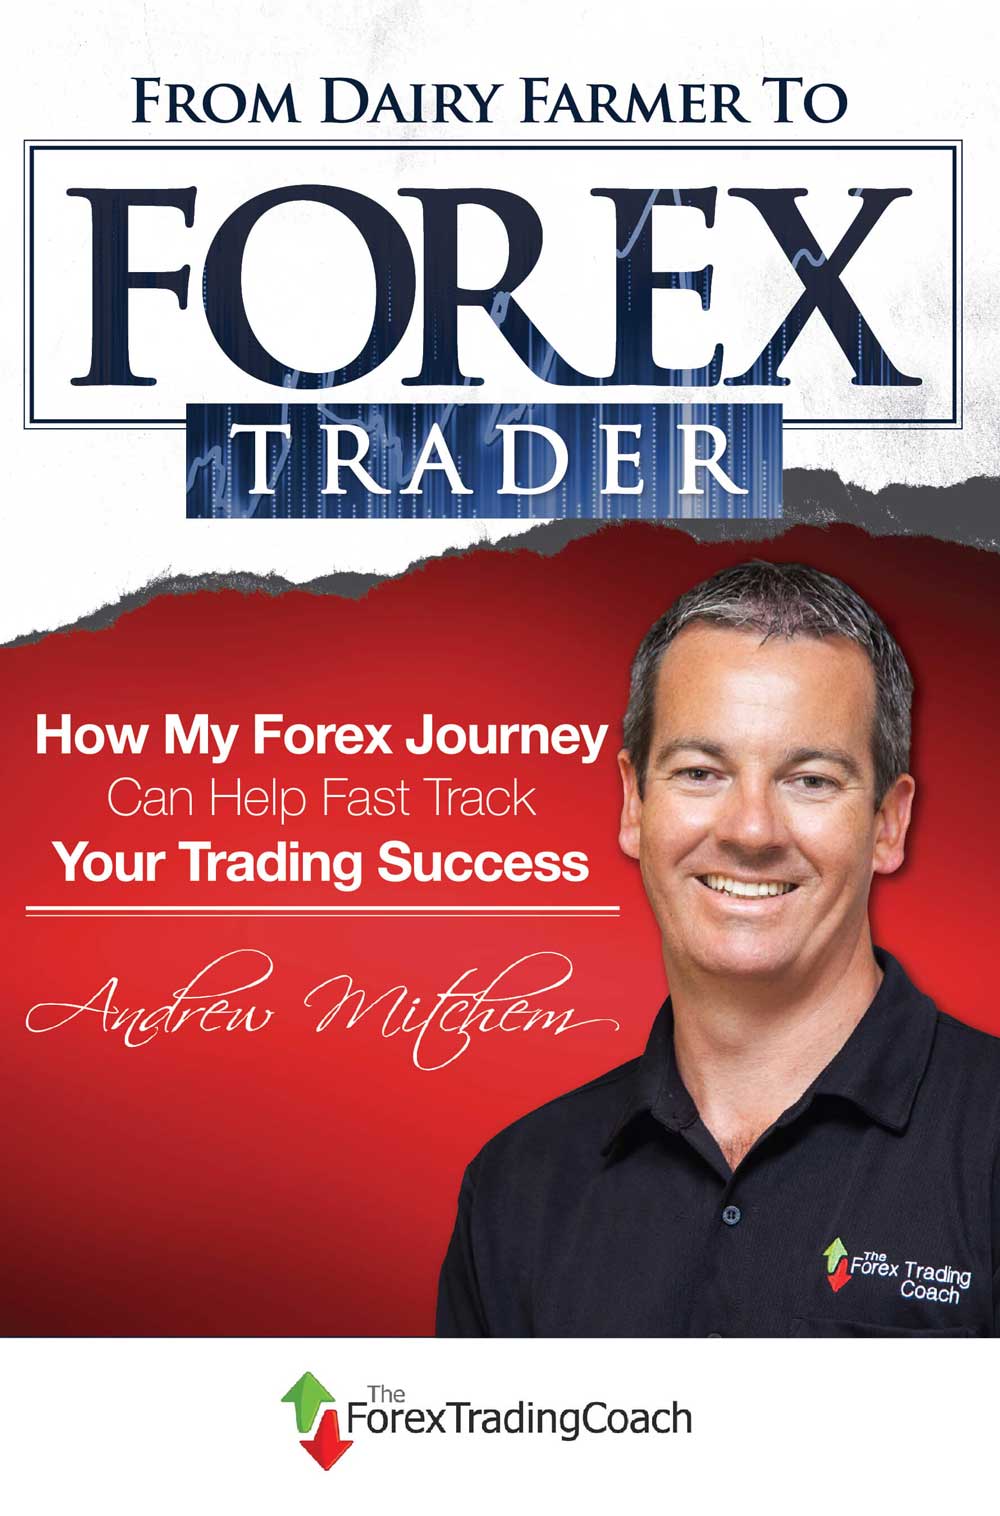 Forex trading coach review